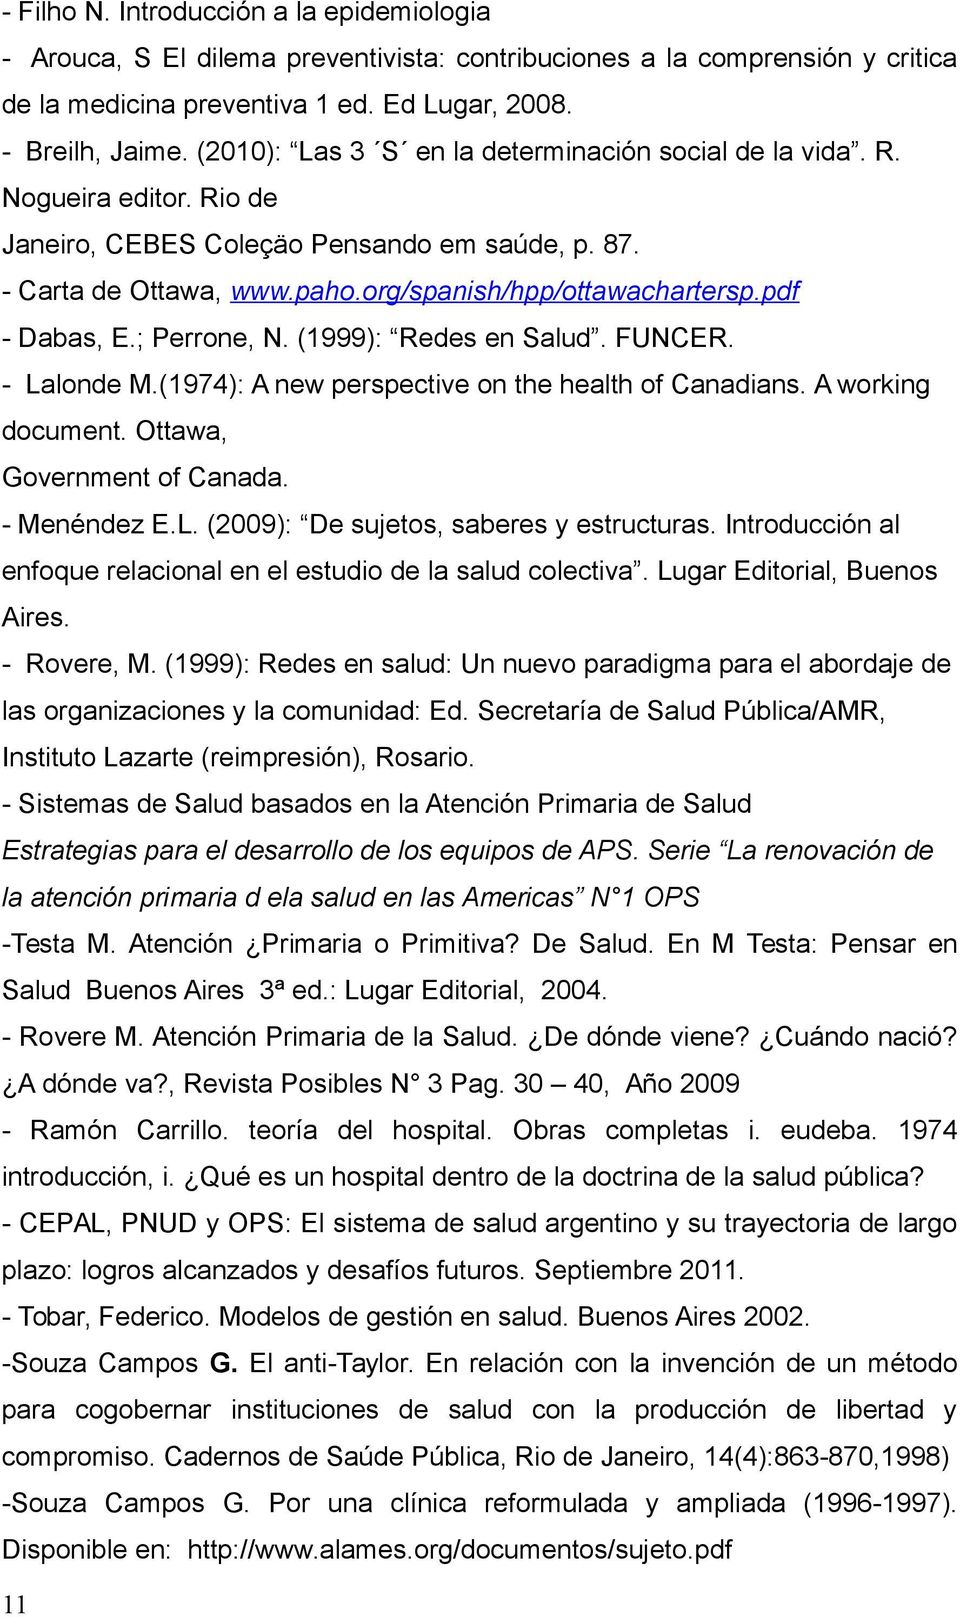 pdf - Dabas, E.; Perrone, N. (1999): Redes en Salud. FUNCER. - Lalonde M.(1974): A new perspective on the health of Canadians. A working document. Ottawa, Government of Canada. - Menéndez E.L. (2009): De sujetos, saberes y estructuras.